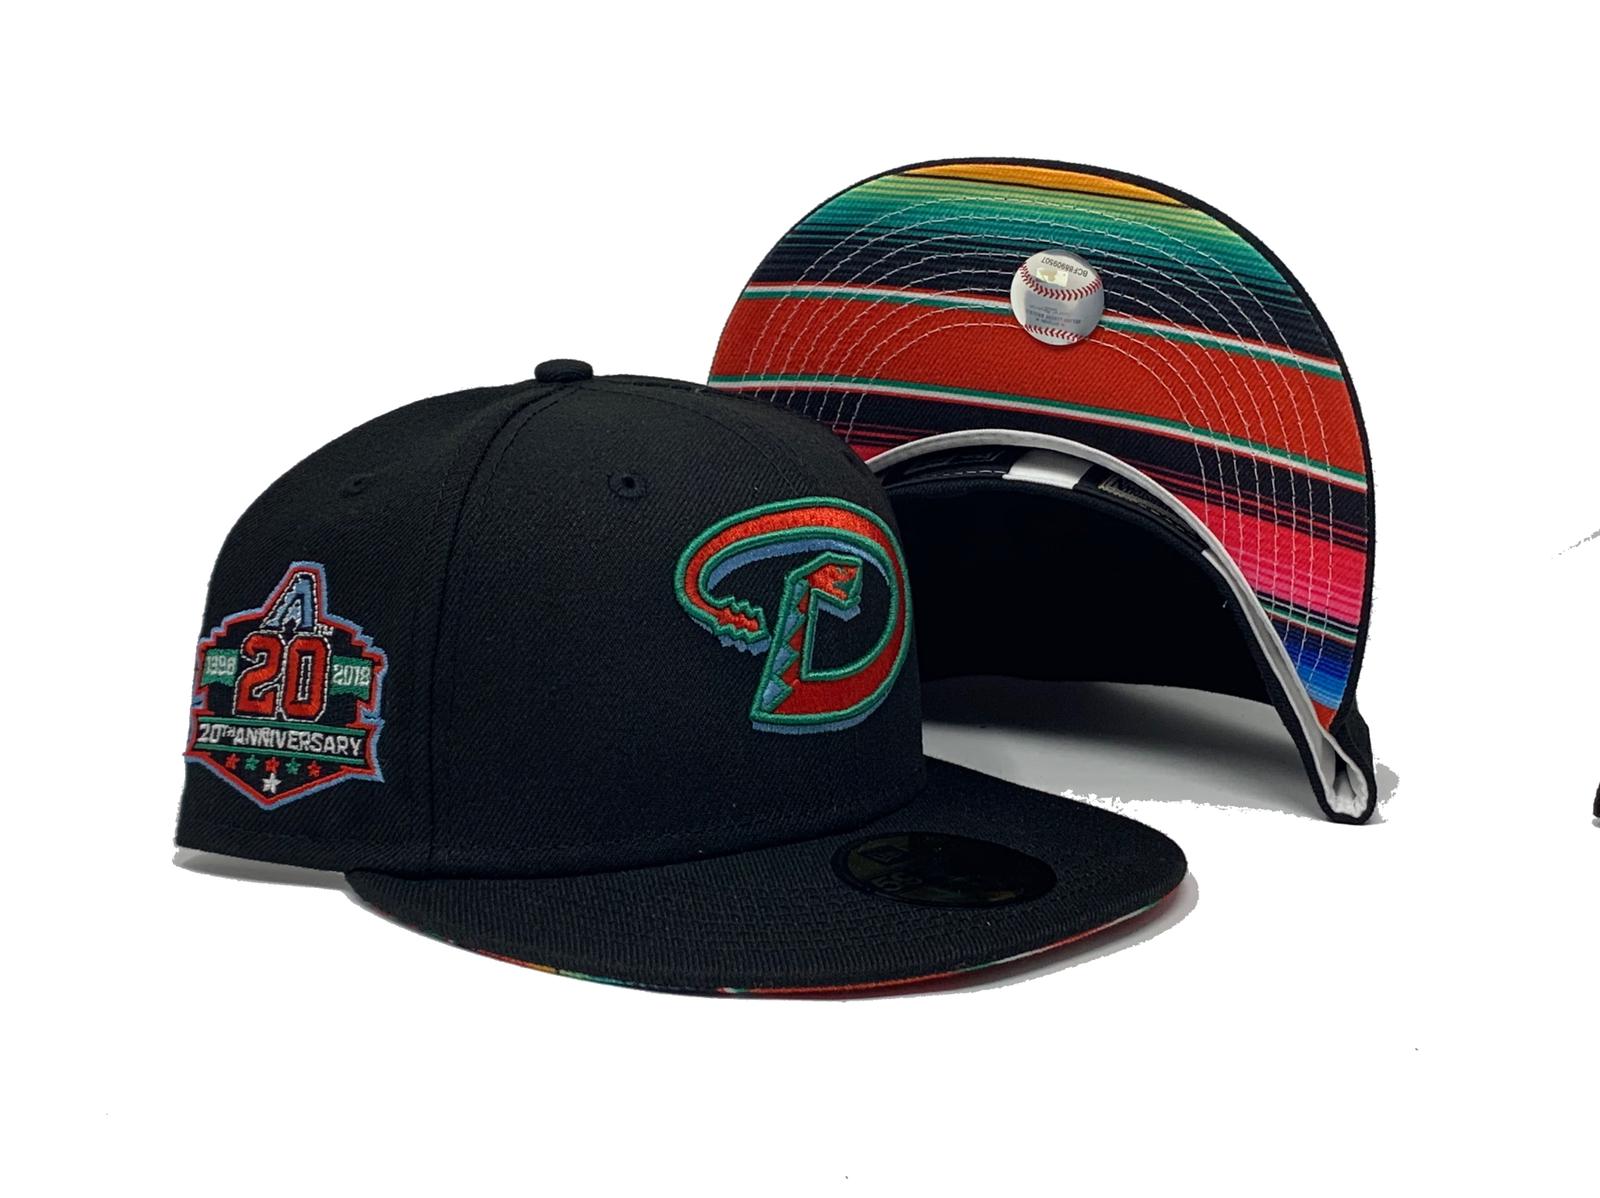 New Era Fitted Hats & Snapback Caps – SHIPPING DEPT